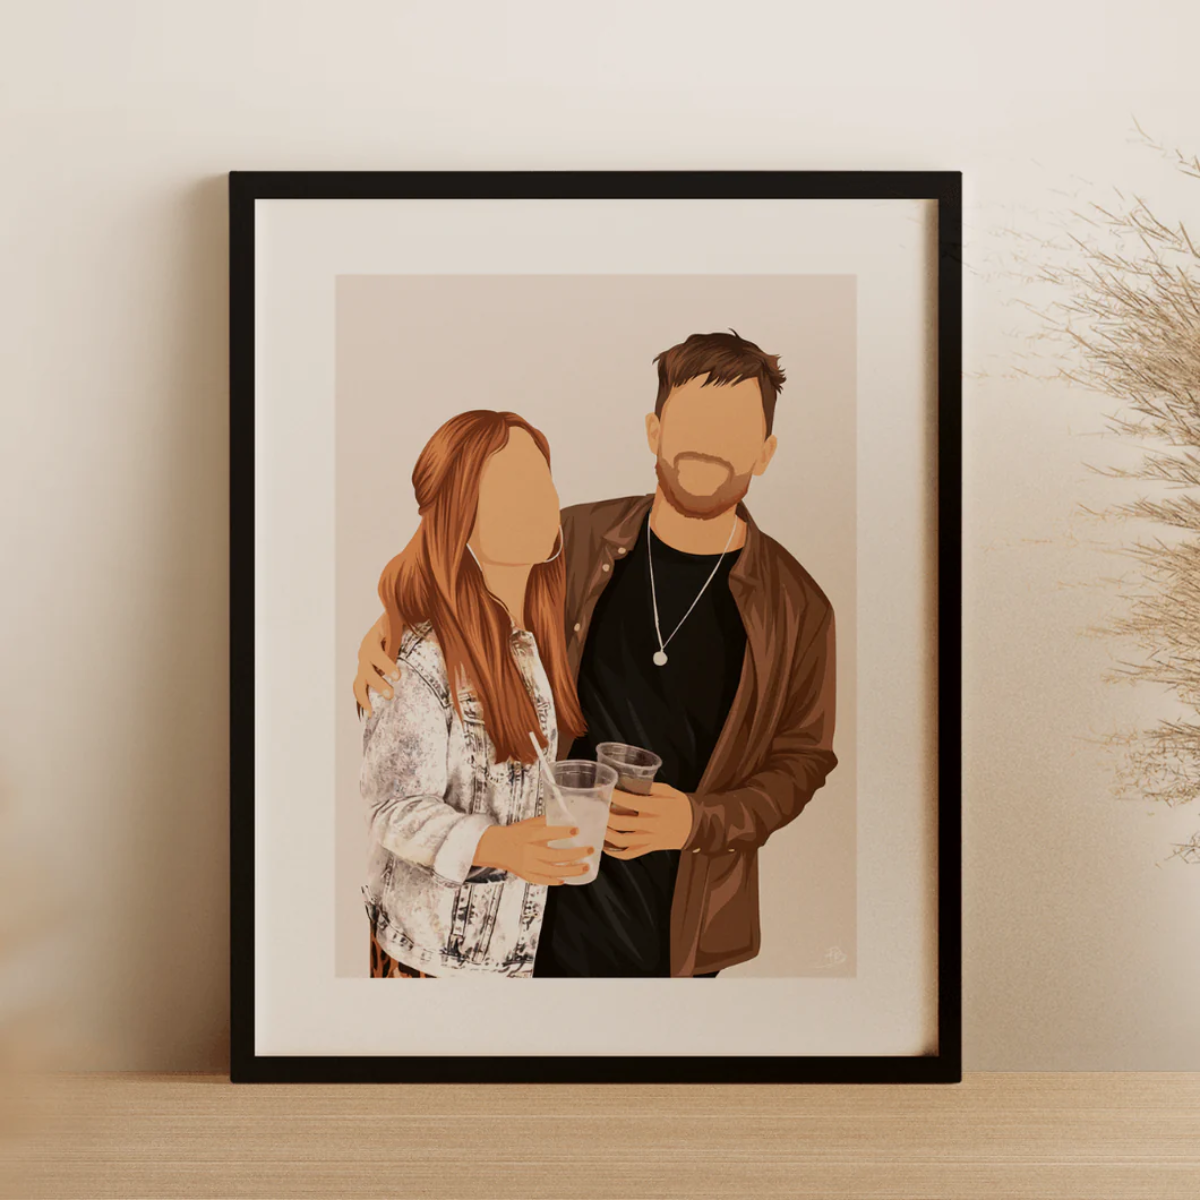 21. Capture Your Love Story with an Artistic Custom Portrait - The Perfect Anniversary Gift for Him